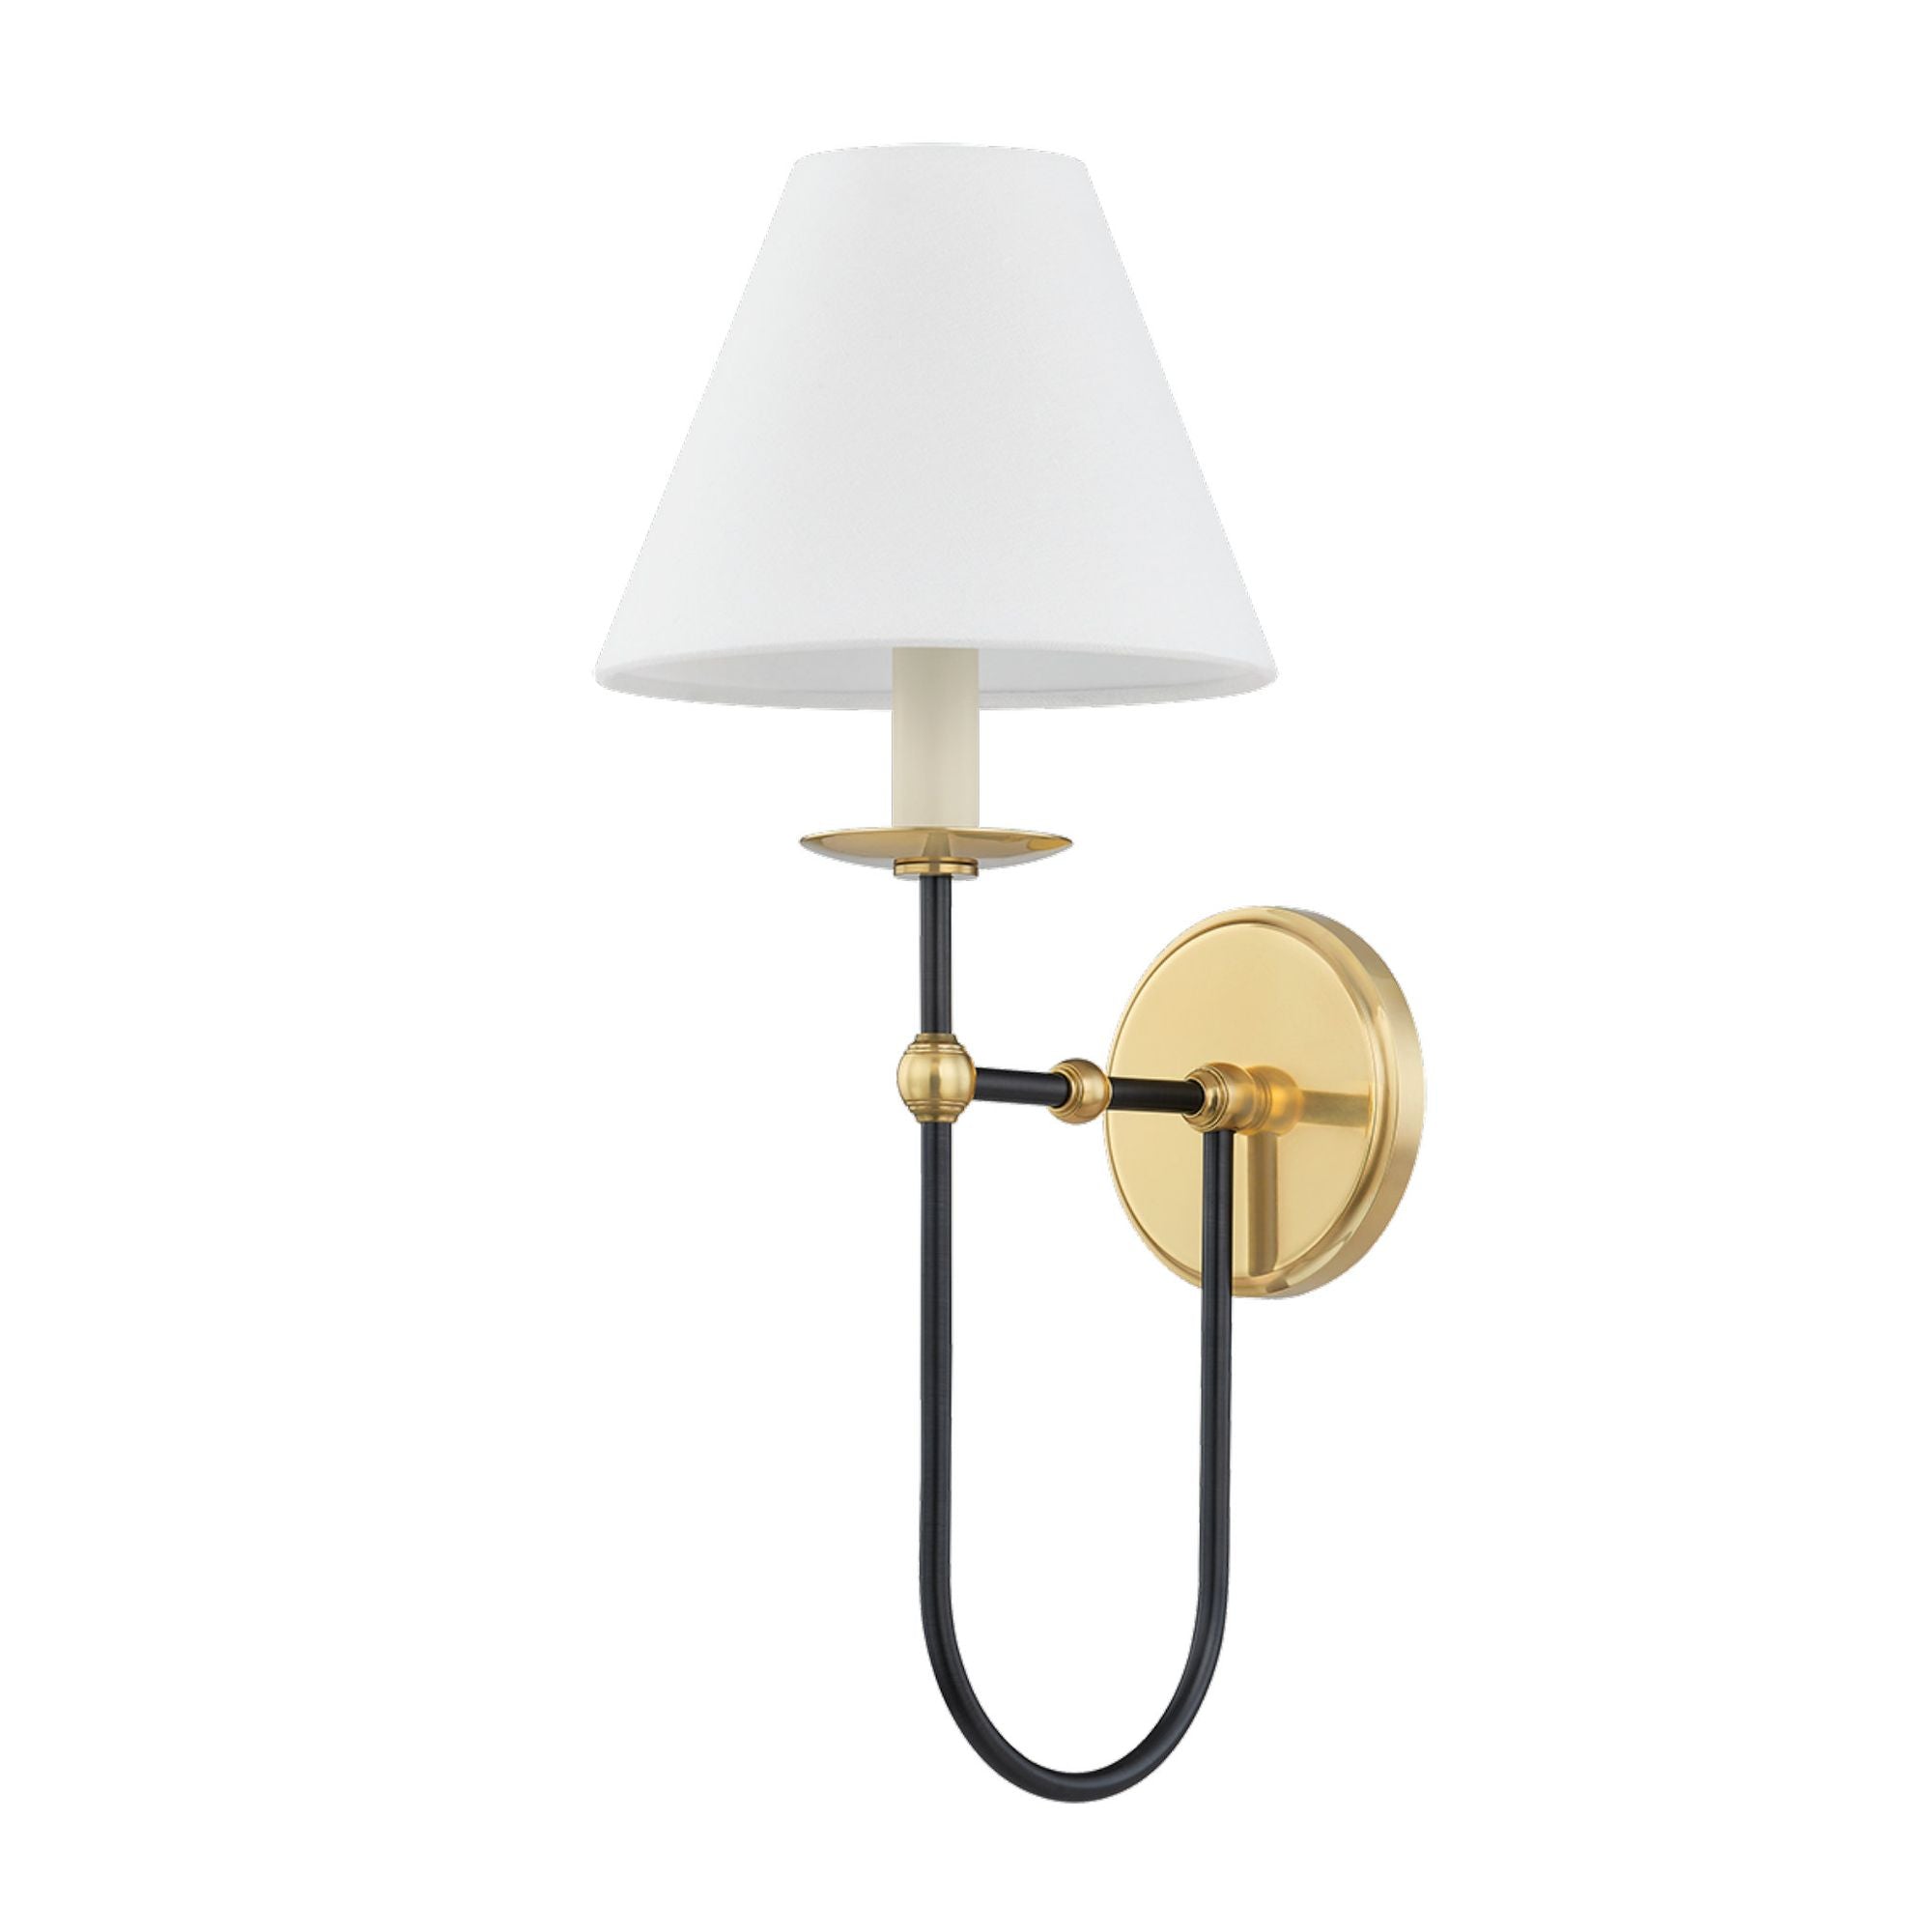 Demarest 1 Light Wall Sconce in Aged Brass/Distressed Bronze